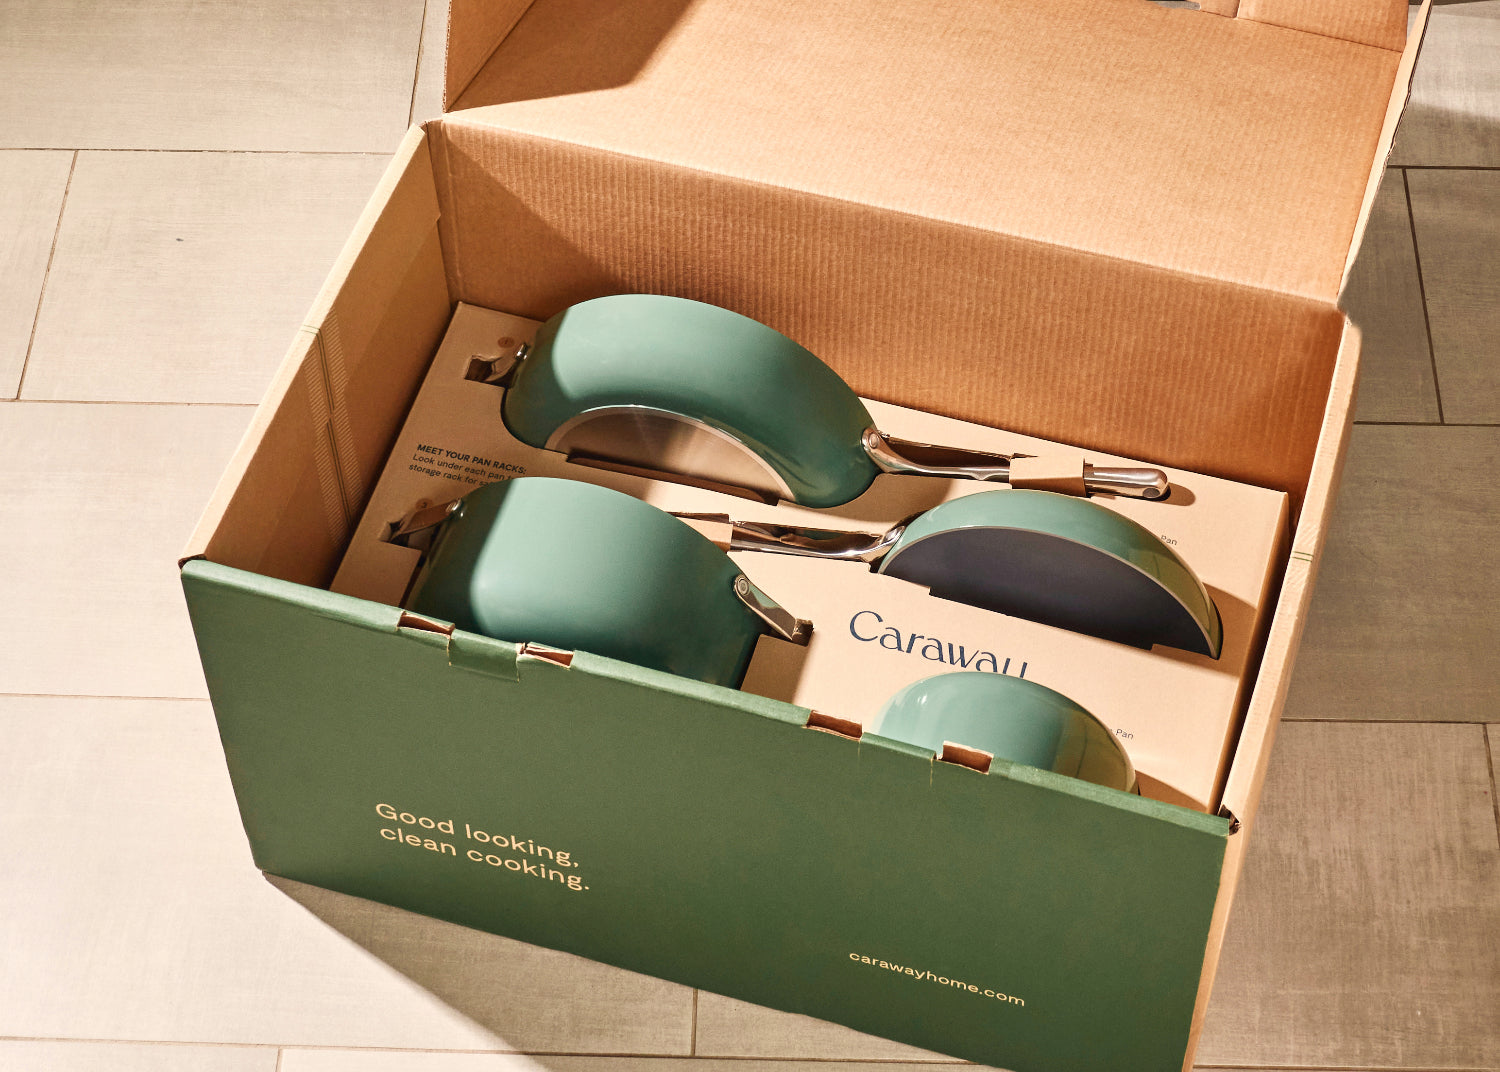 Cardboard packaging example from brand Caraway